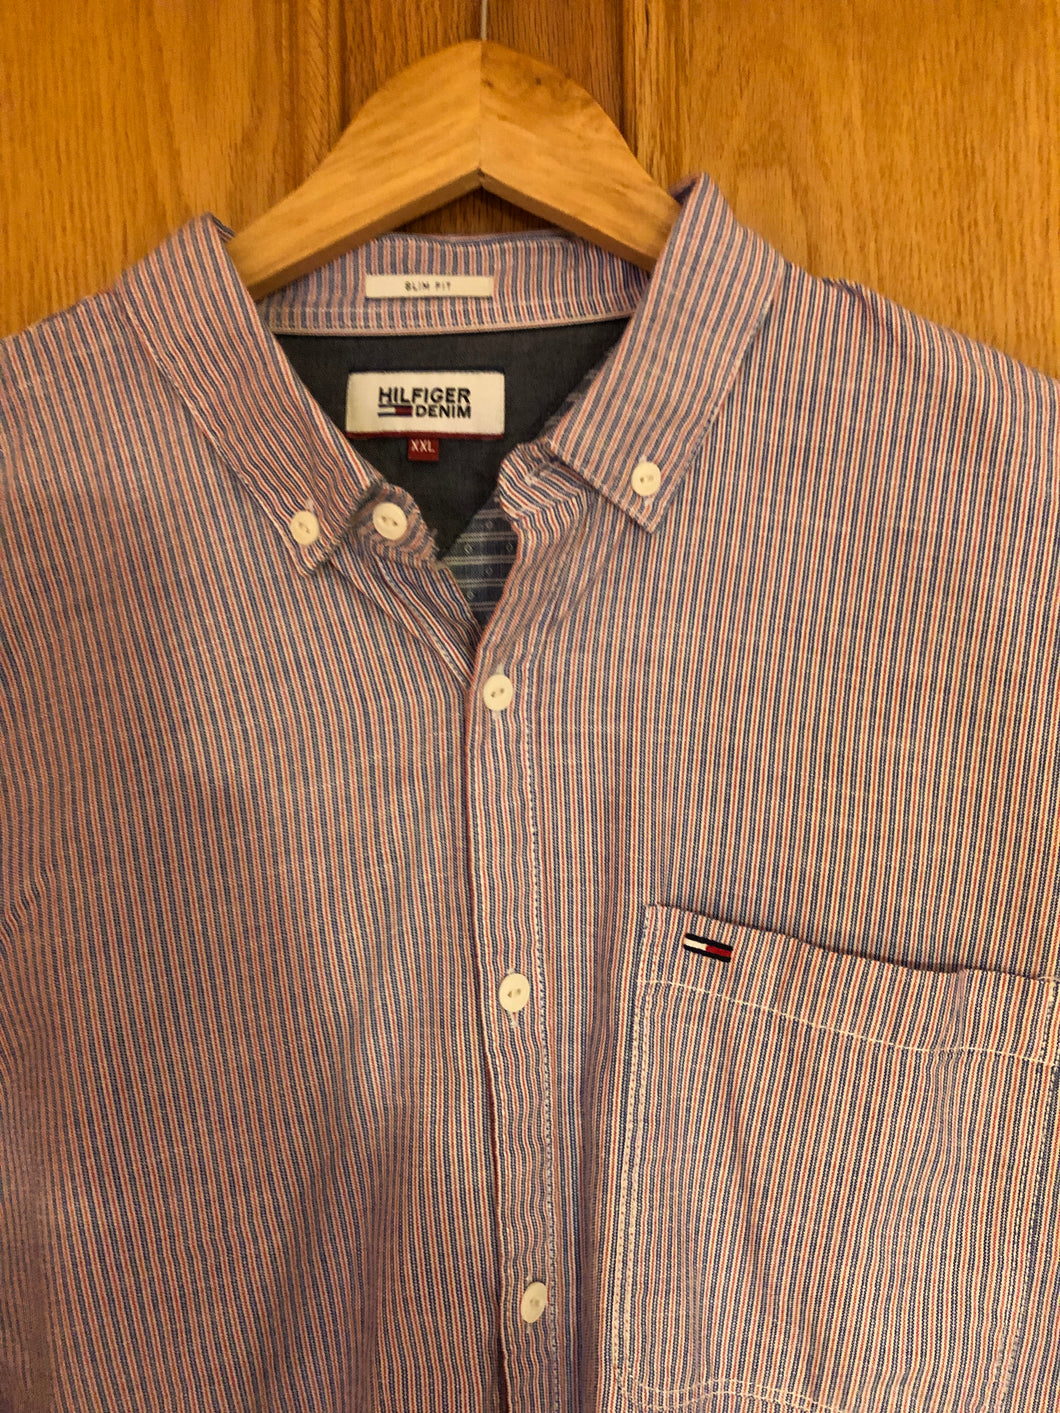 Tommy Hilfiger Shirt XXL Excellent Condition Pre-Owned